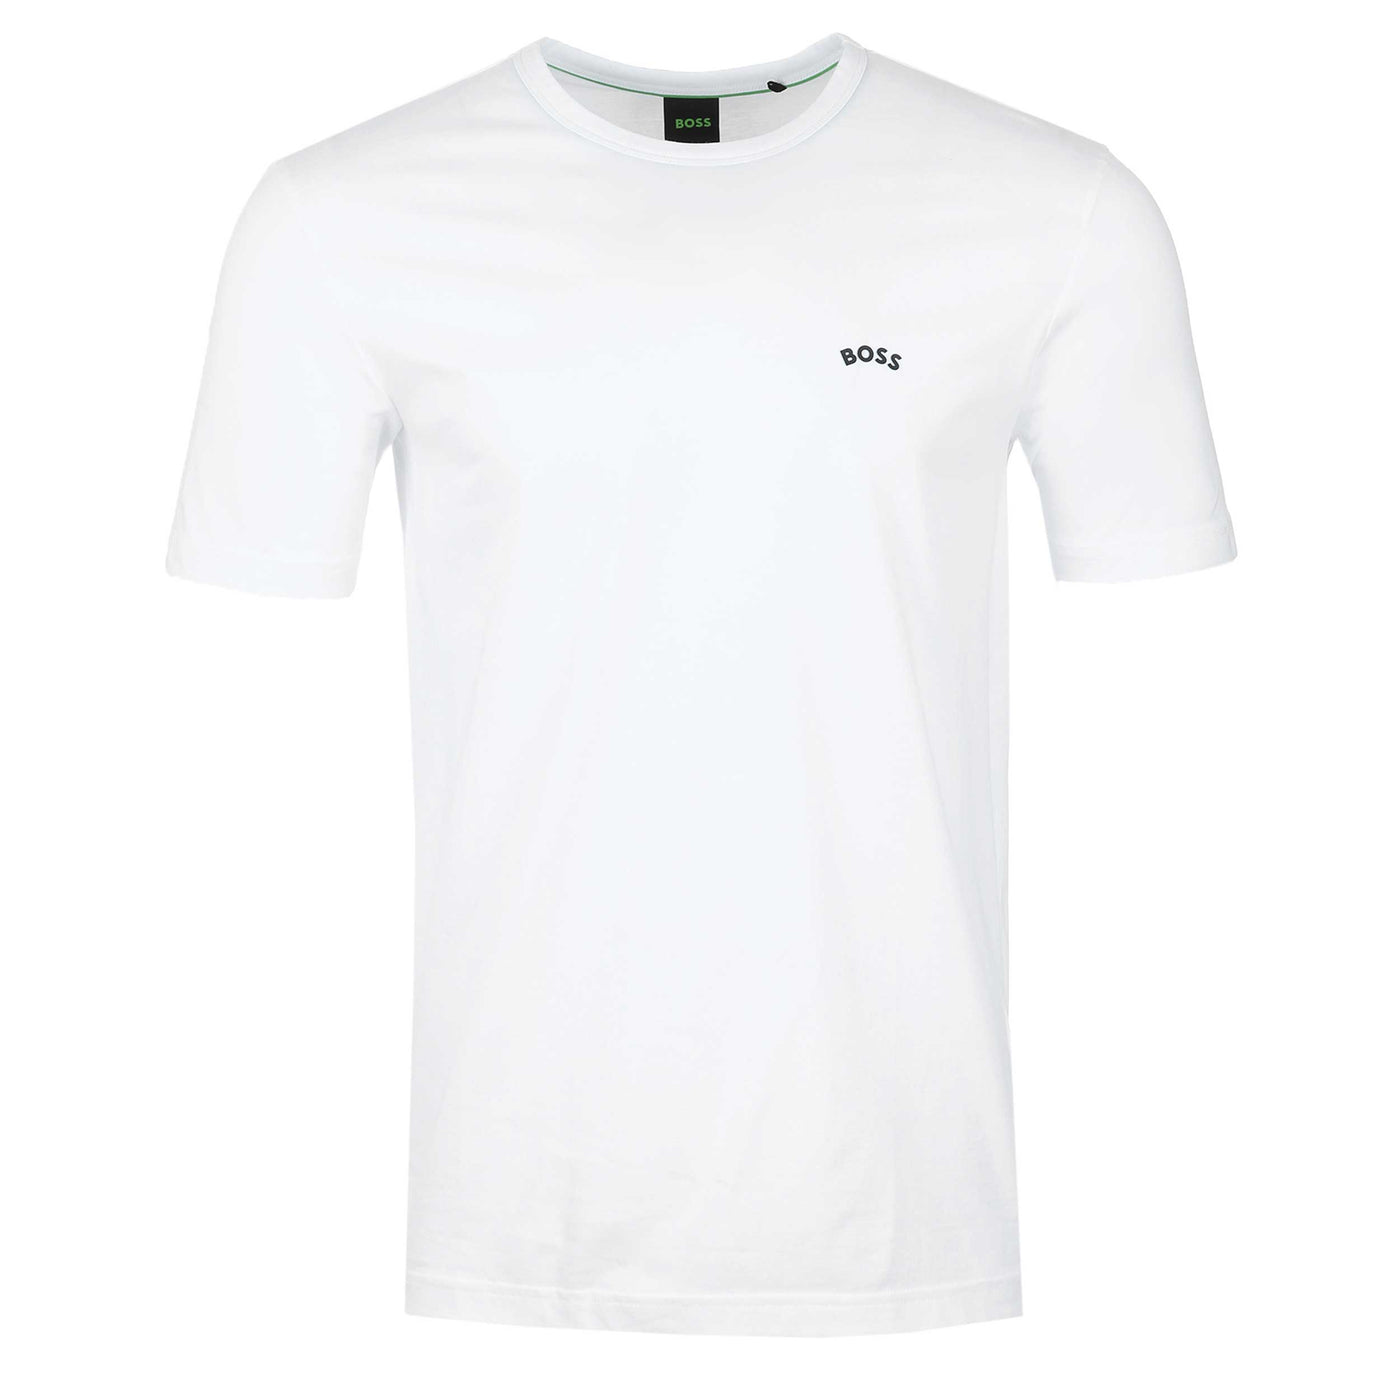 BOSS Tee Curved T-Shirt in White